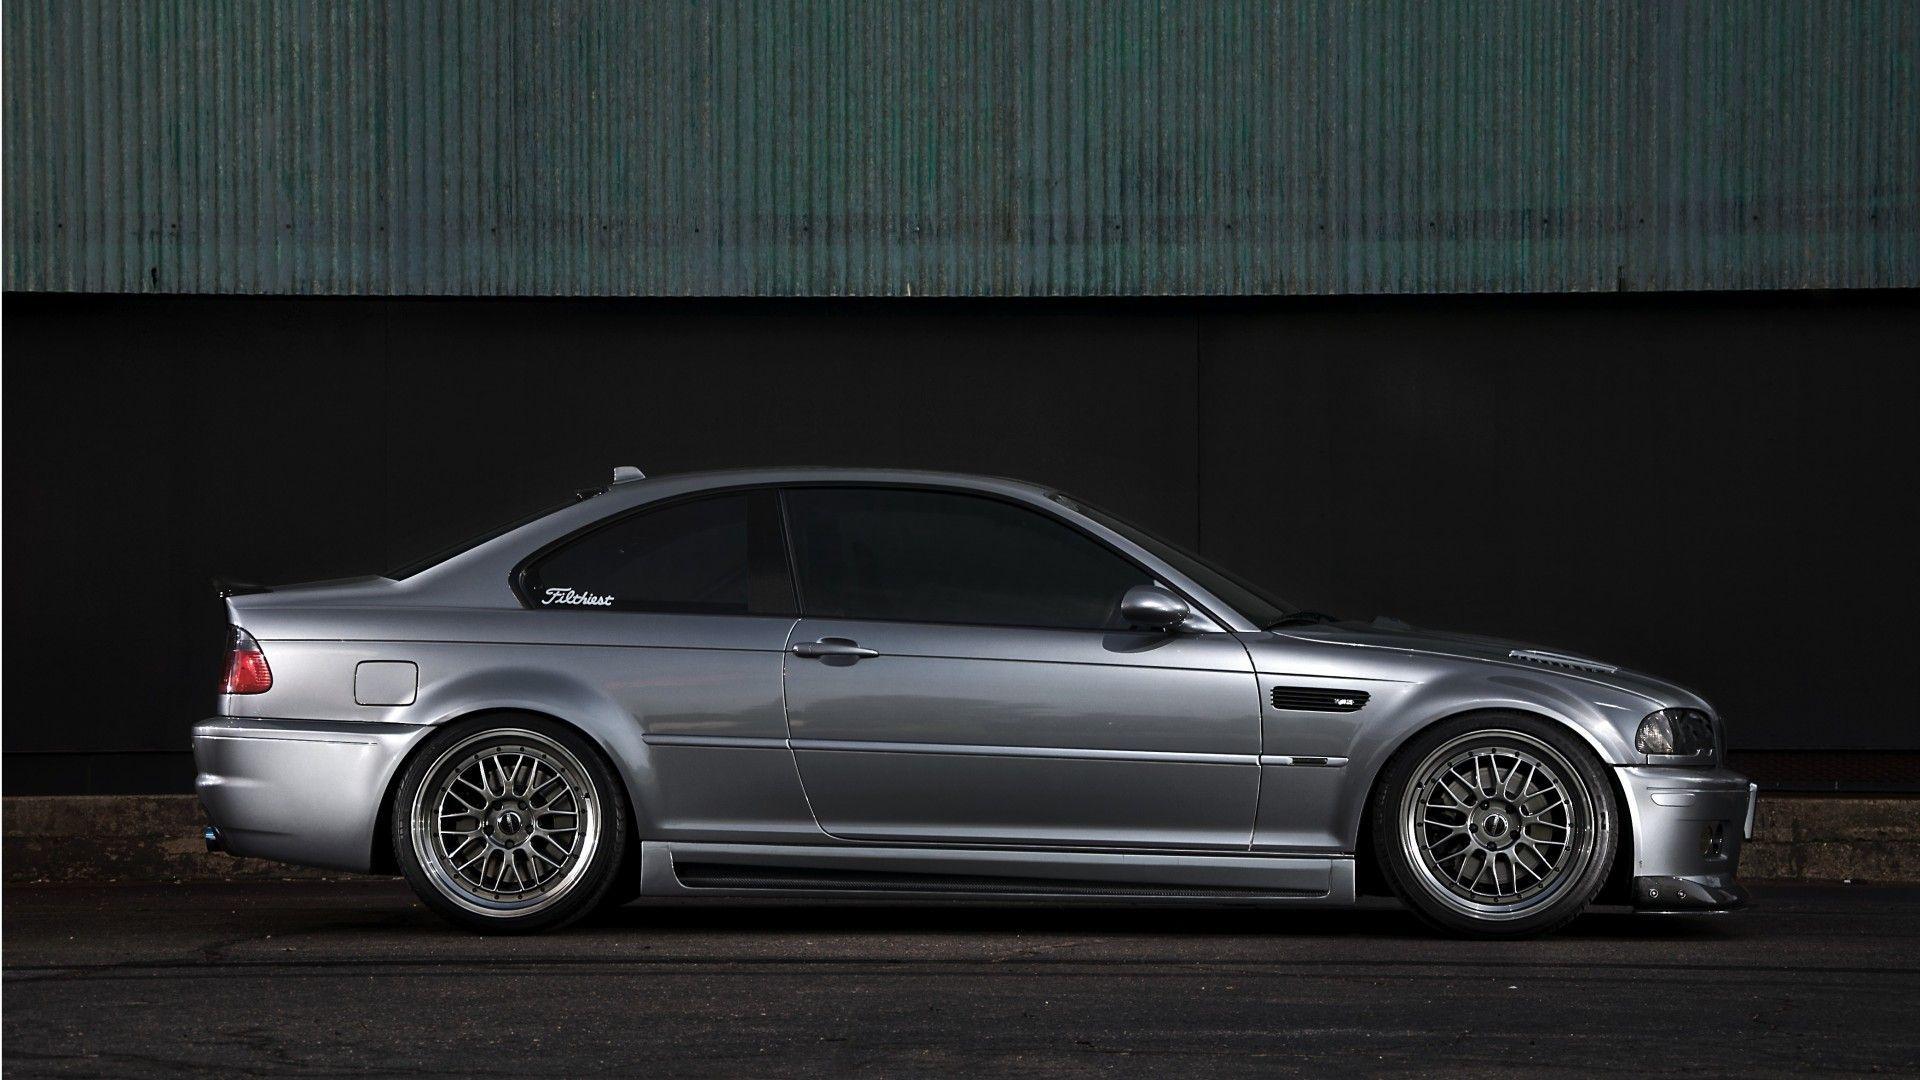 Bmw m E tuning wallpapers